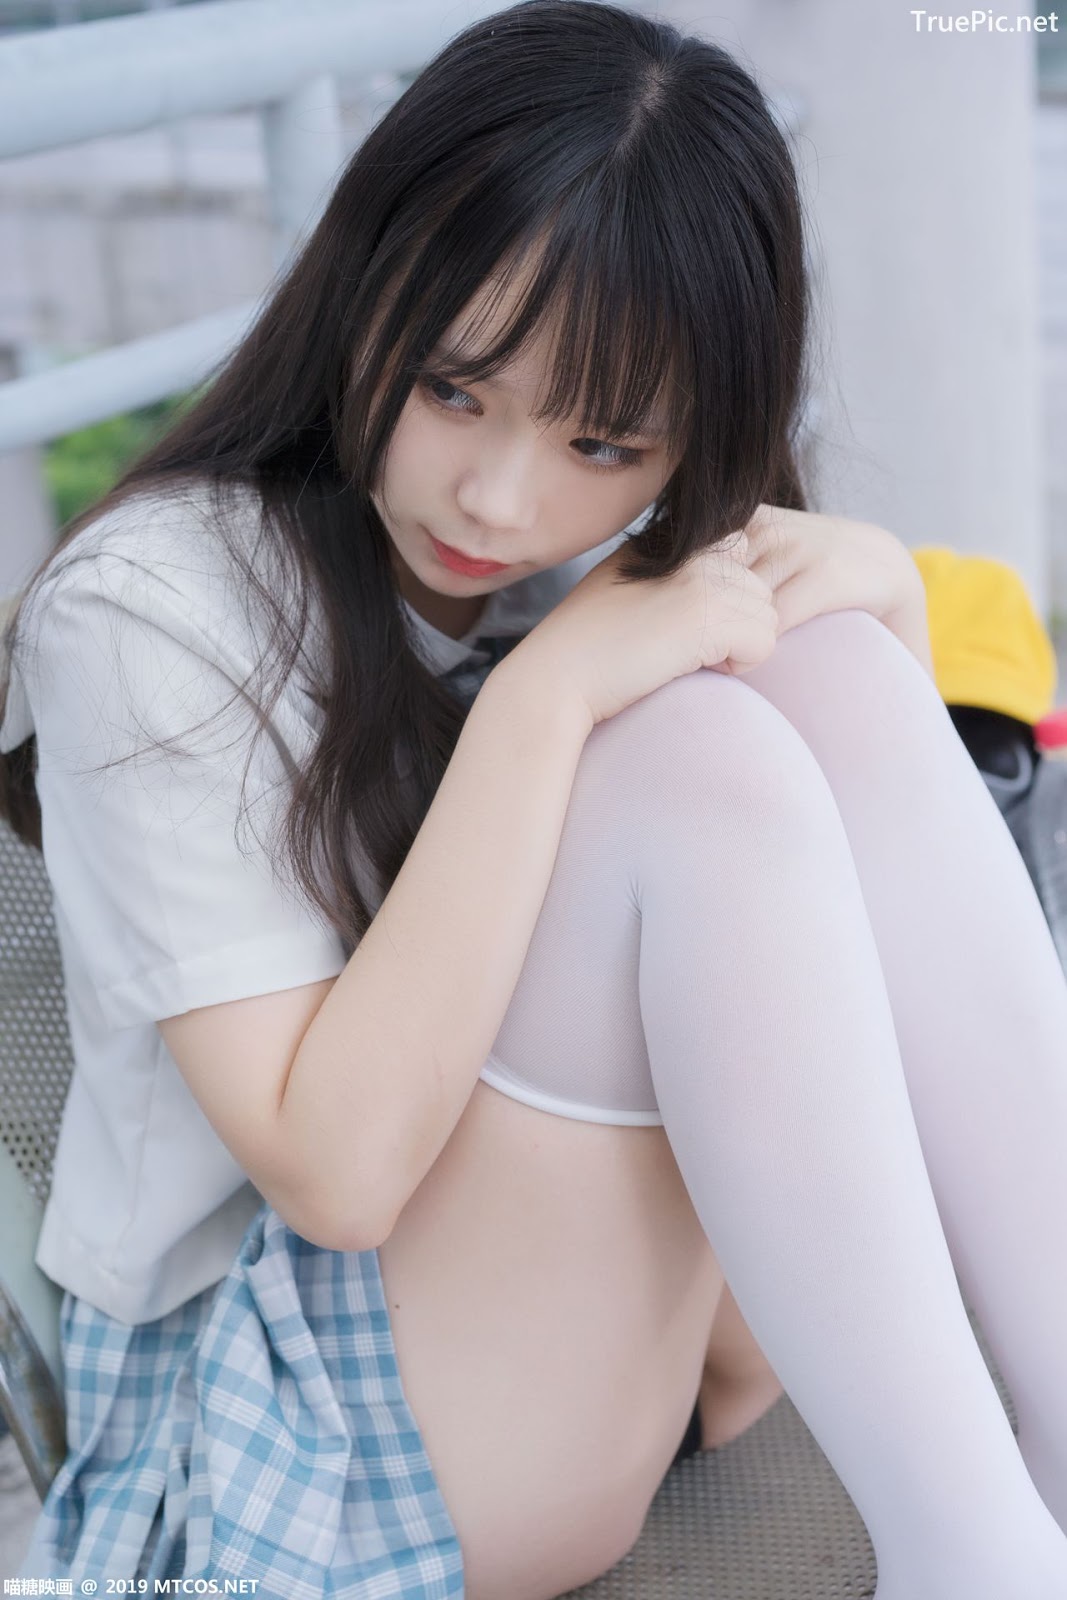 Image [MTCos] 喵糖映画 Vol.015 – Chinese Cute Model - White Shirt and Plaid Skirt - TruePic.net- Picture-33